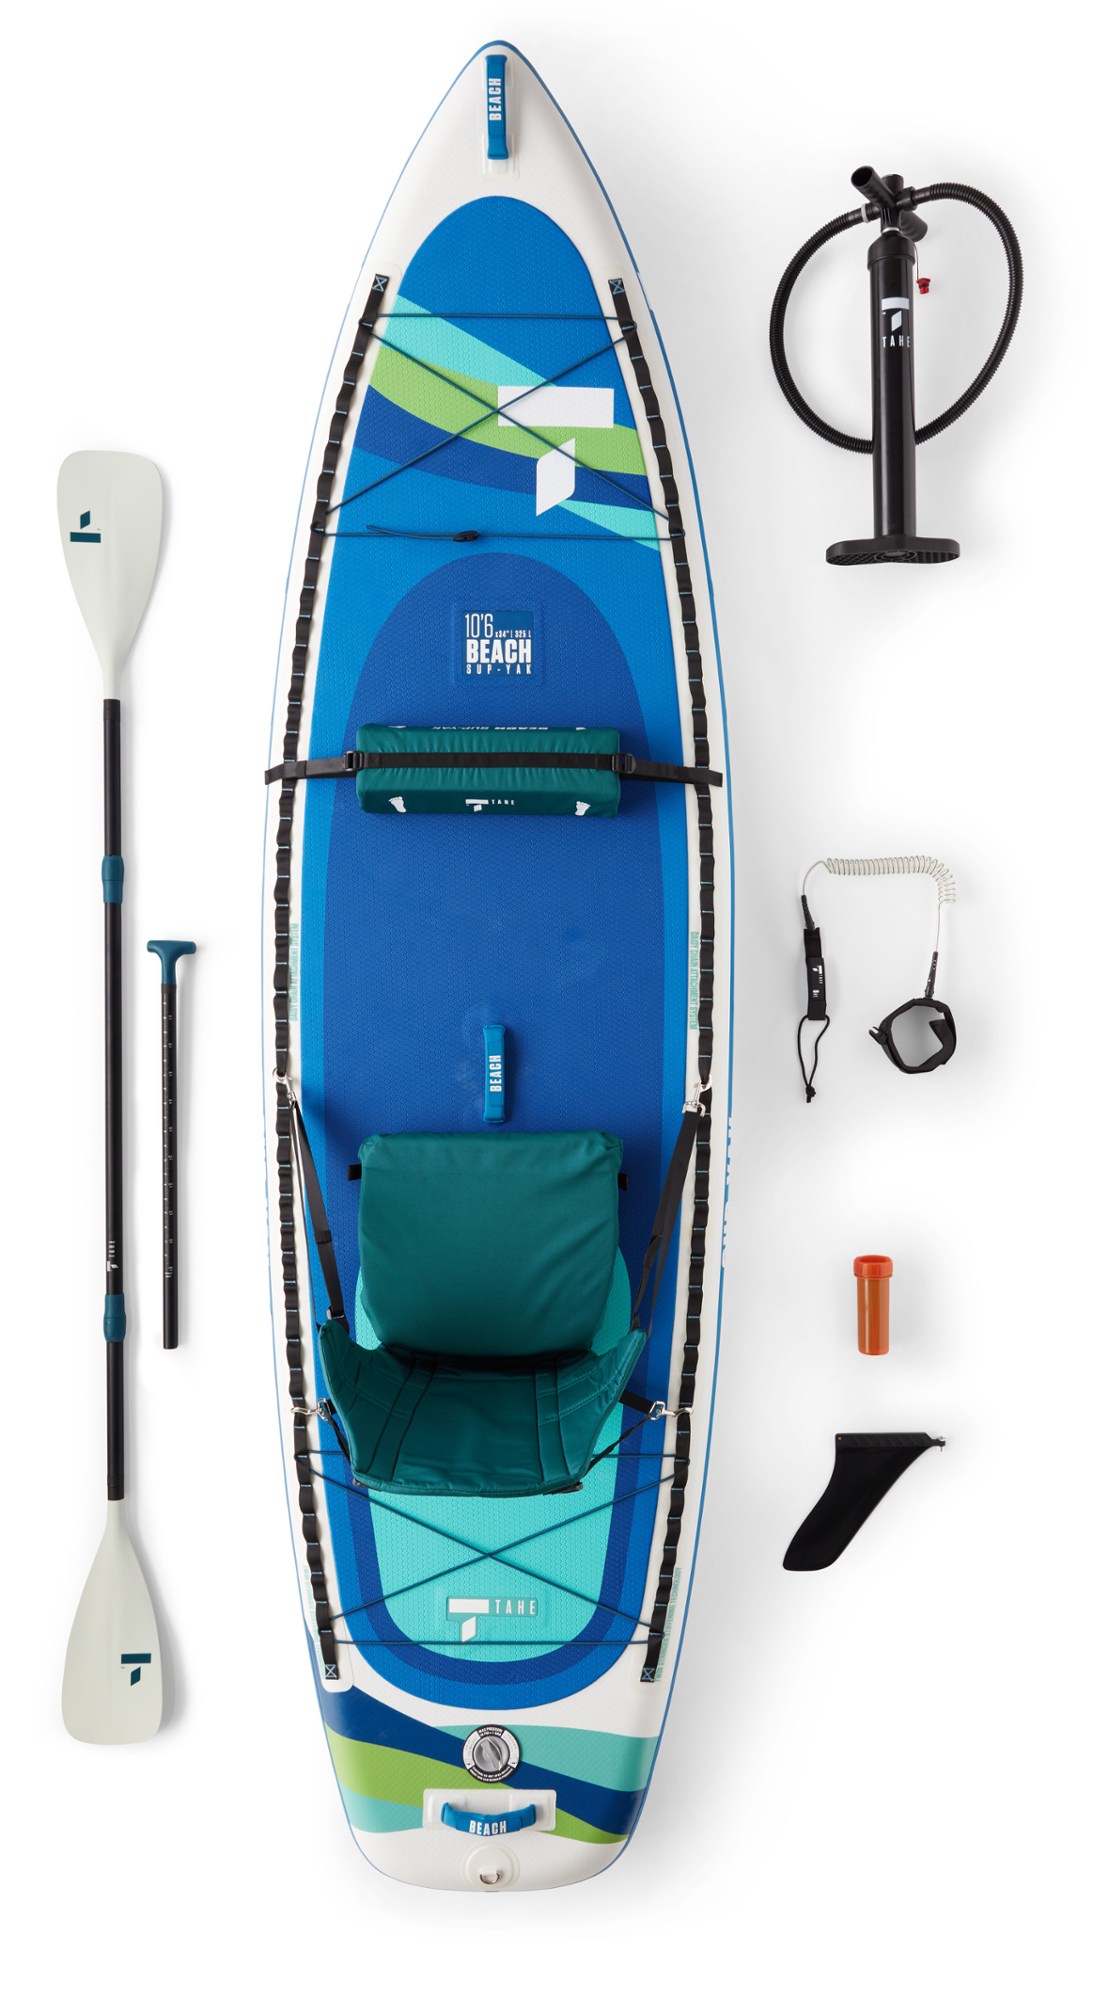 Tahe Beach SUP-Yak Inflatable Stand Up Paddle Board with Paddle